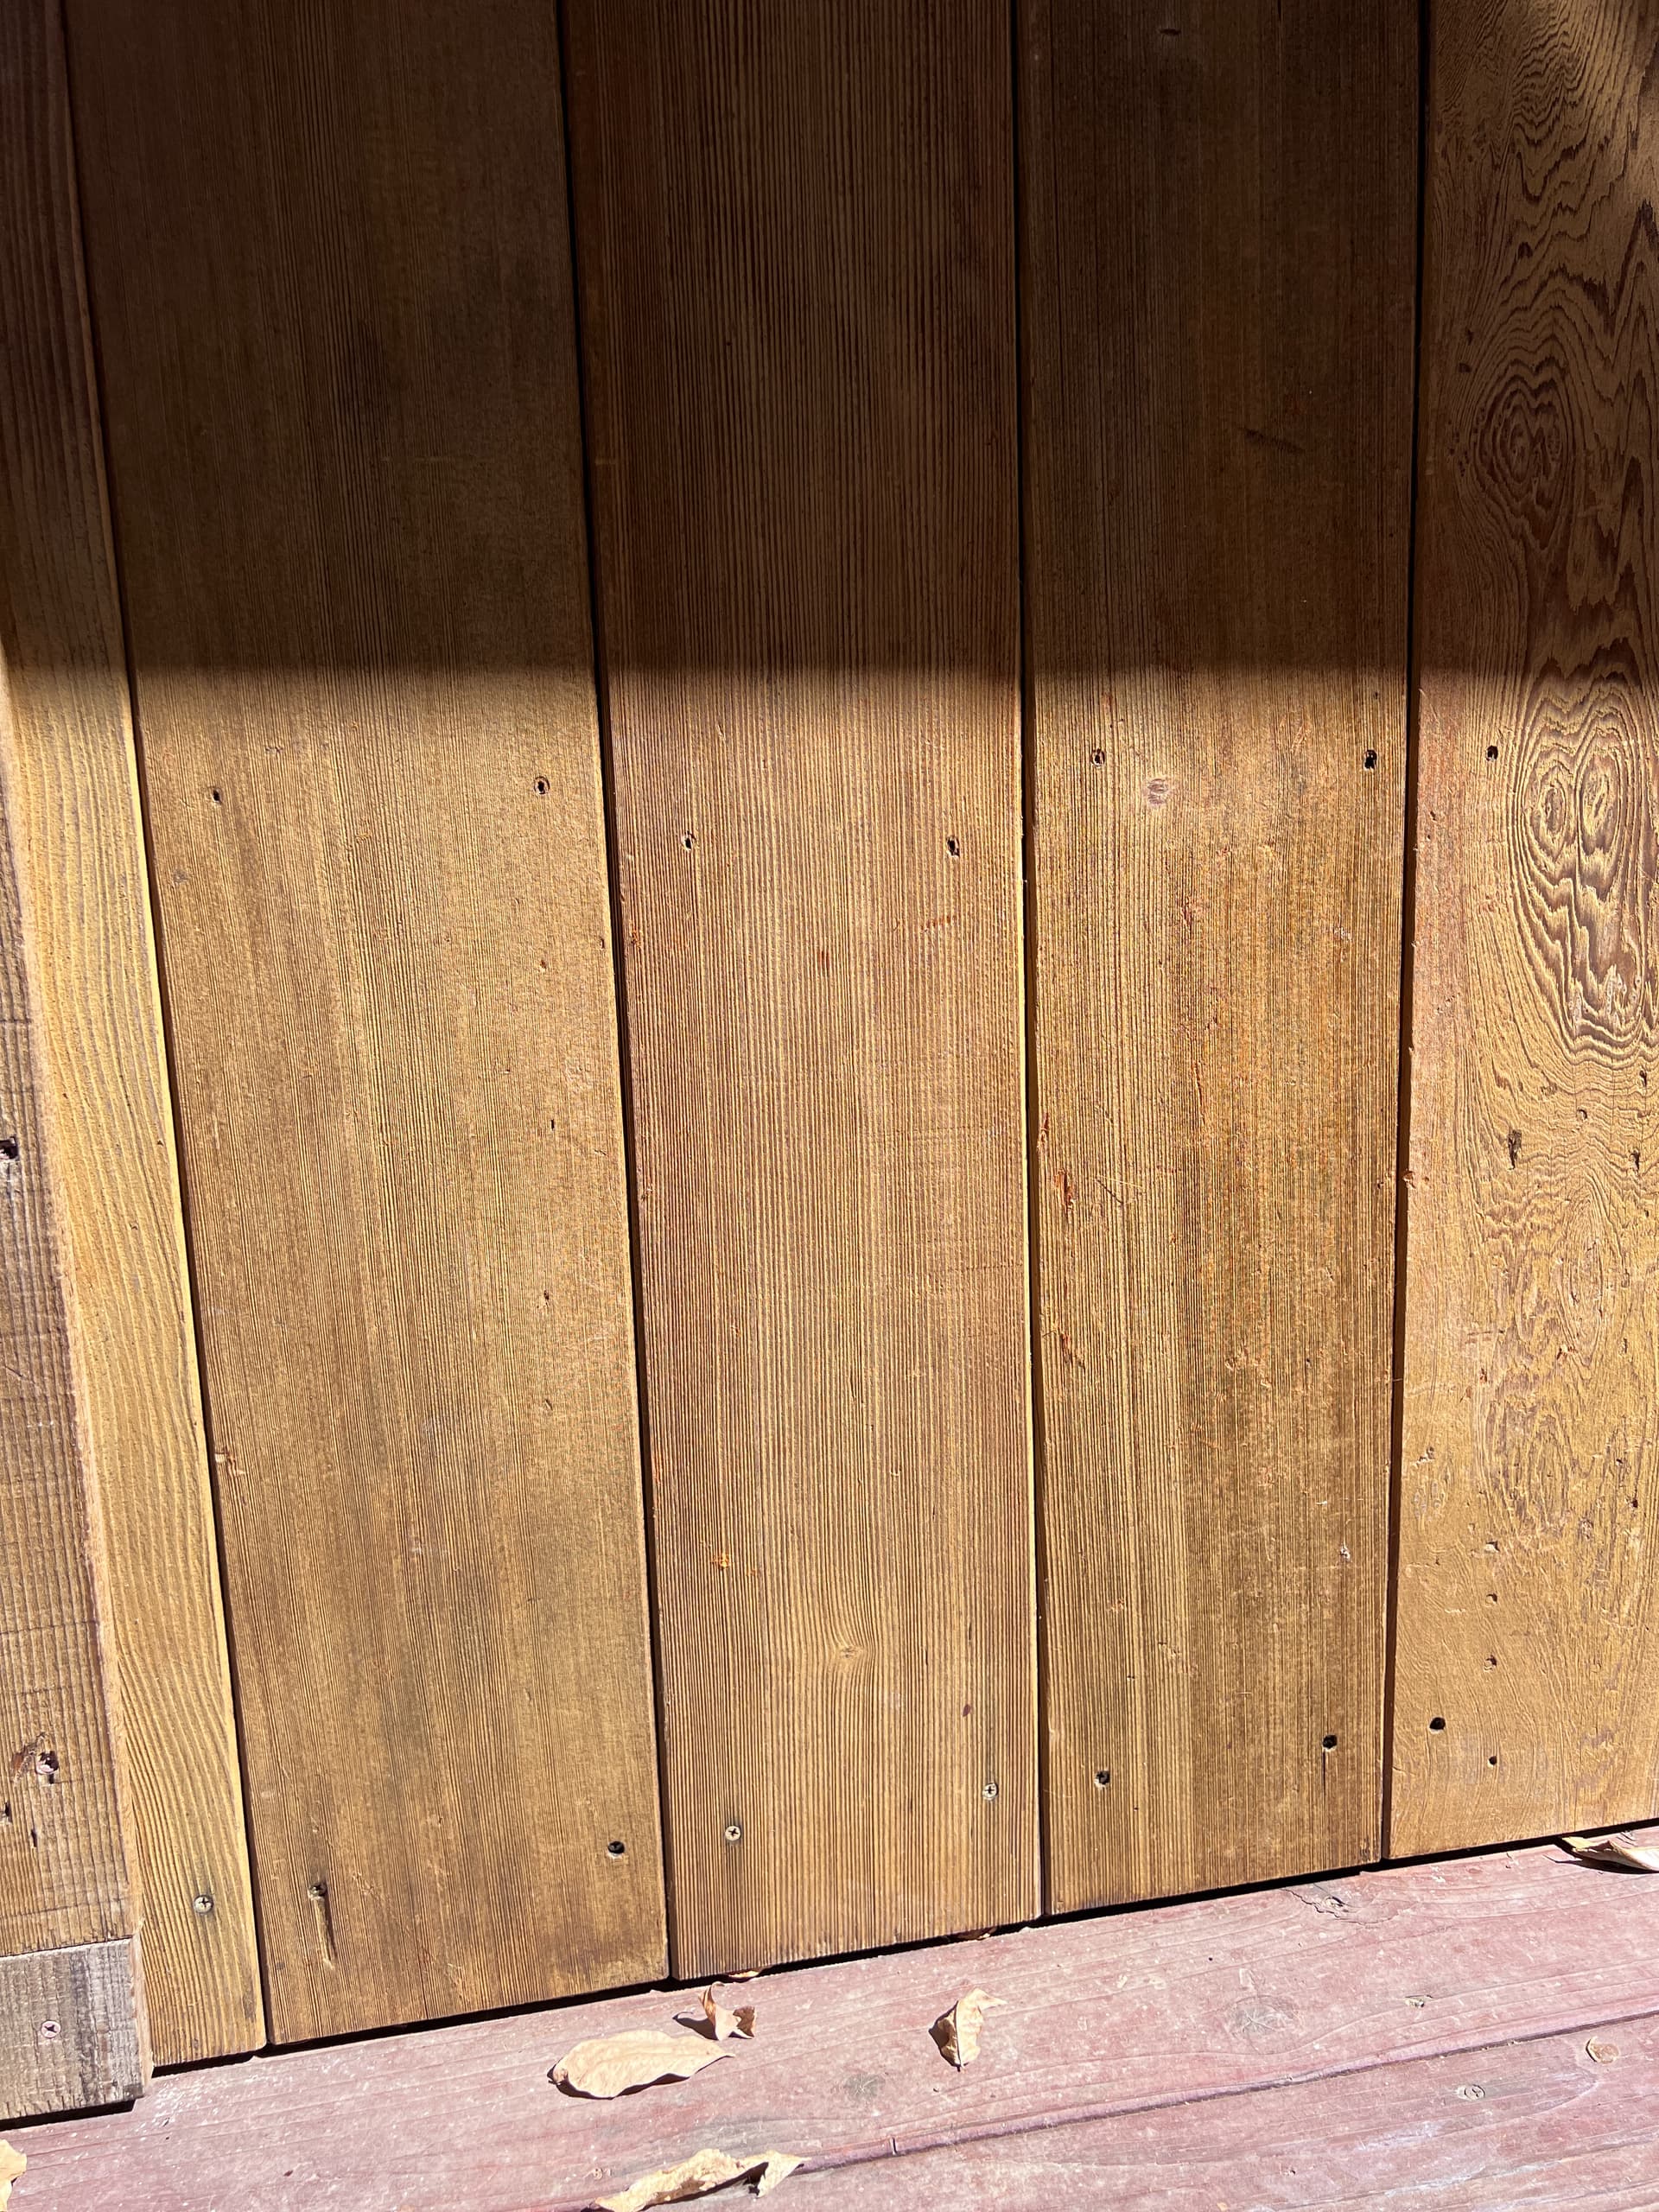 How To Clean & Stain Weathered Redwood Siding - Building Advisor